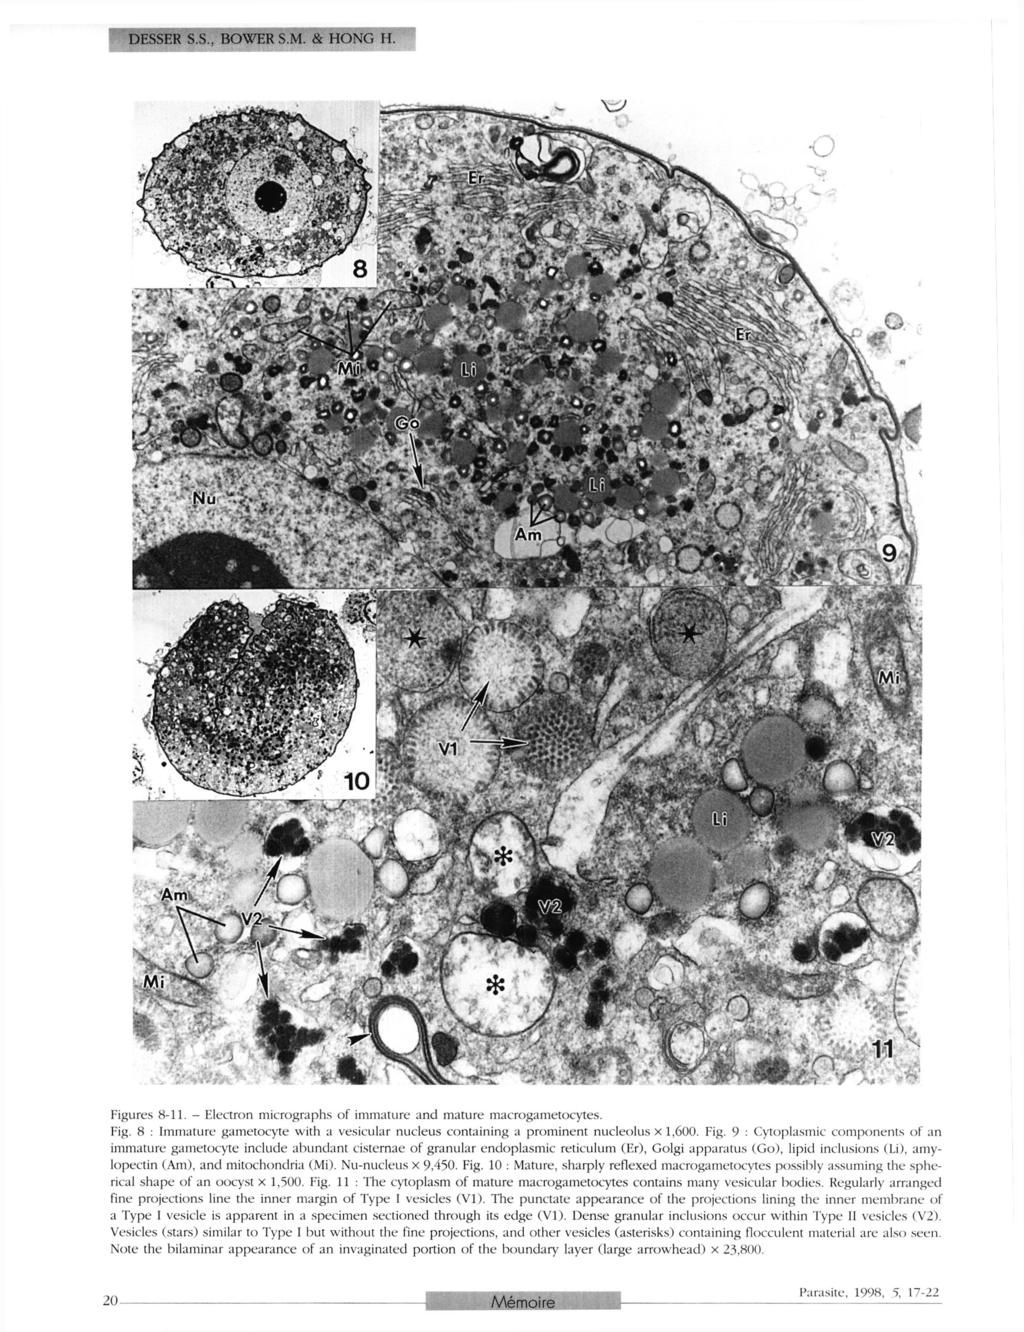 DESSER S.S., BOWER S.M. & HONG H. Figures 8-11. - Electron micrographs of immature and mature macrogametocytes. Fig. 8 : Immature gametocyte with a vesicular nucleus containing a prominent nucleolus x 1,600.